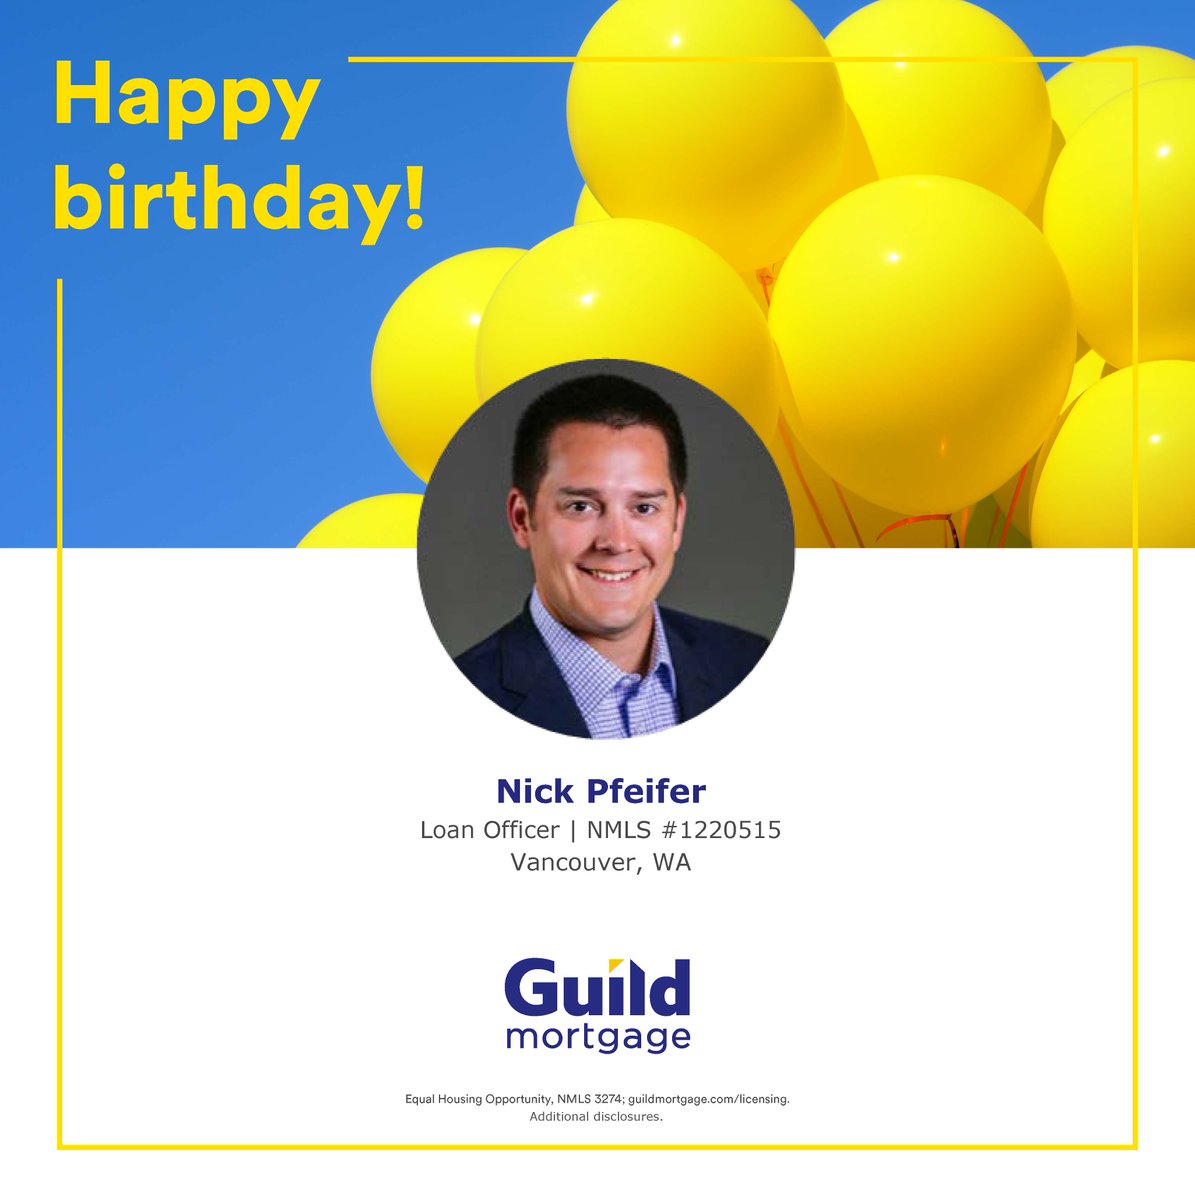 Nick, today is your day to shine... go out and make it memorable!
#guildmortgage #vancouverwa #happybirthday #cake #celebrate